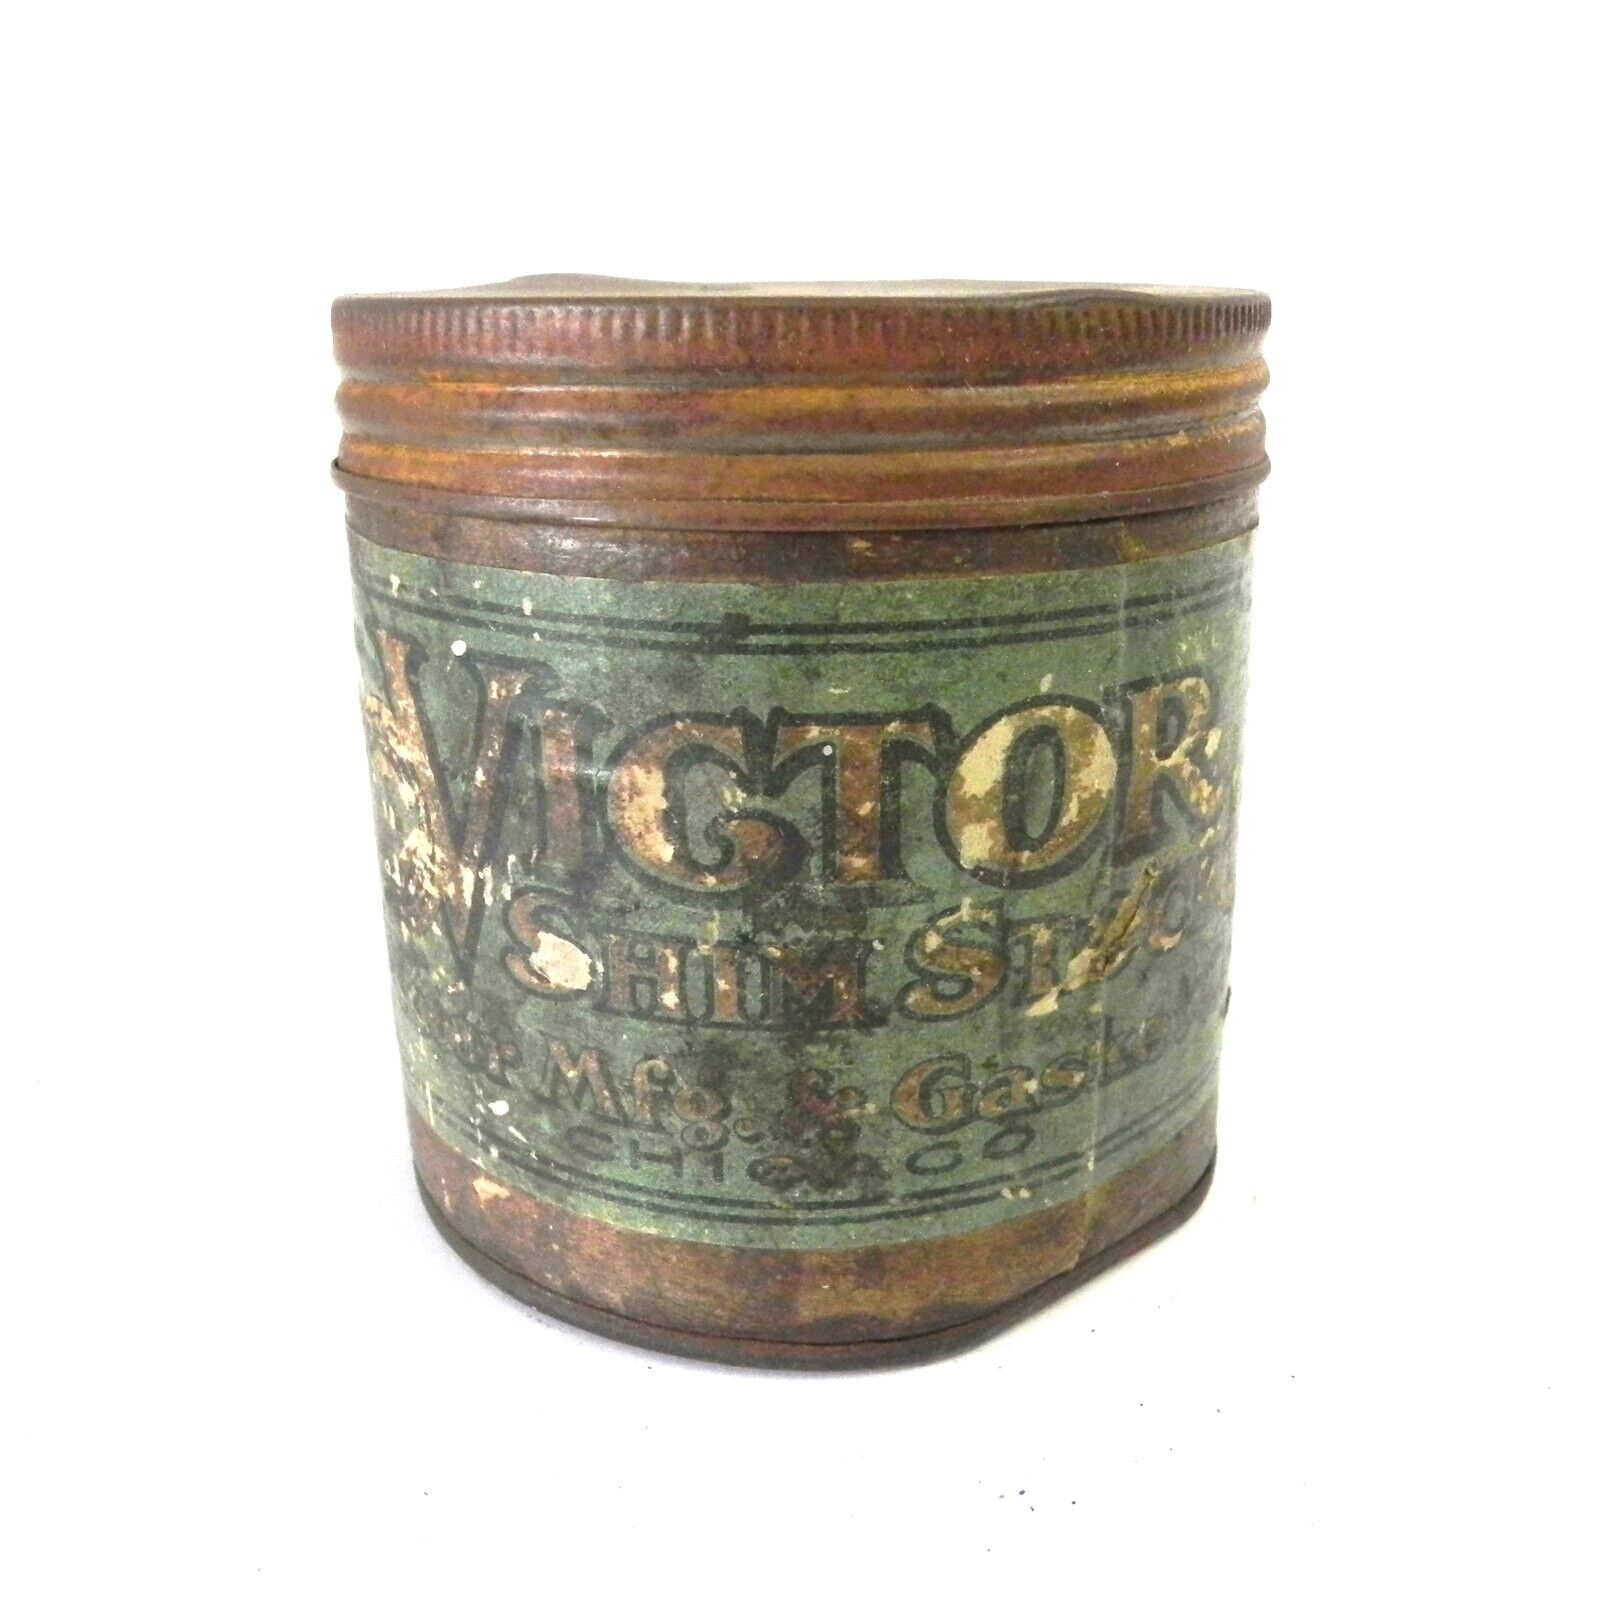 VINTAGE VICTOR SHIM STOCK CONTAINER W/ SOME CONTENTS LEFT 1910's 1920's ERA USED